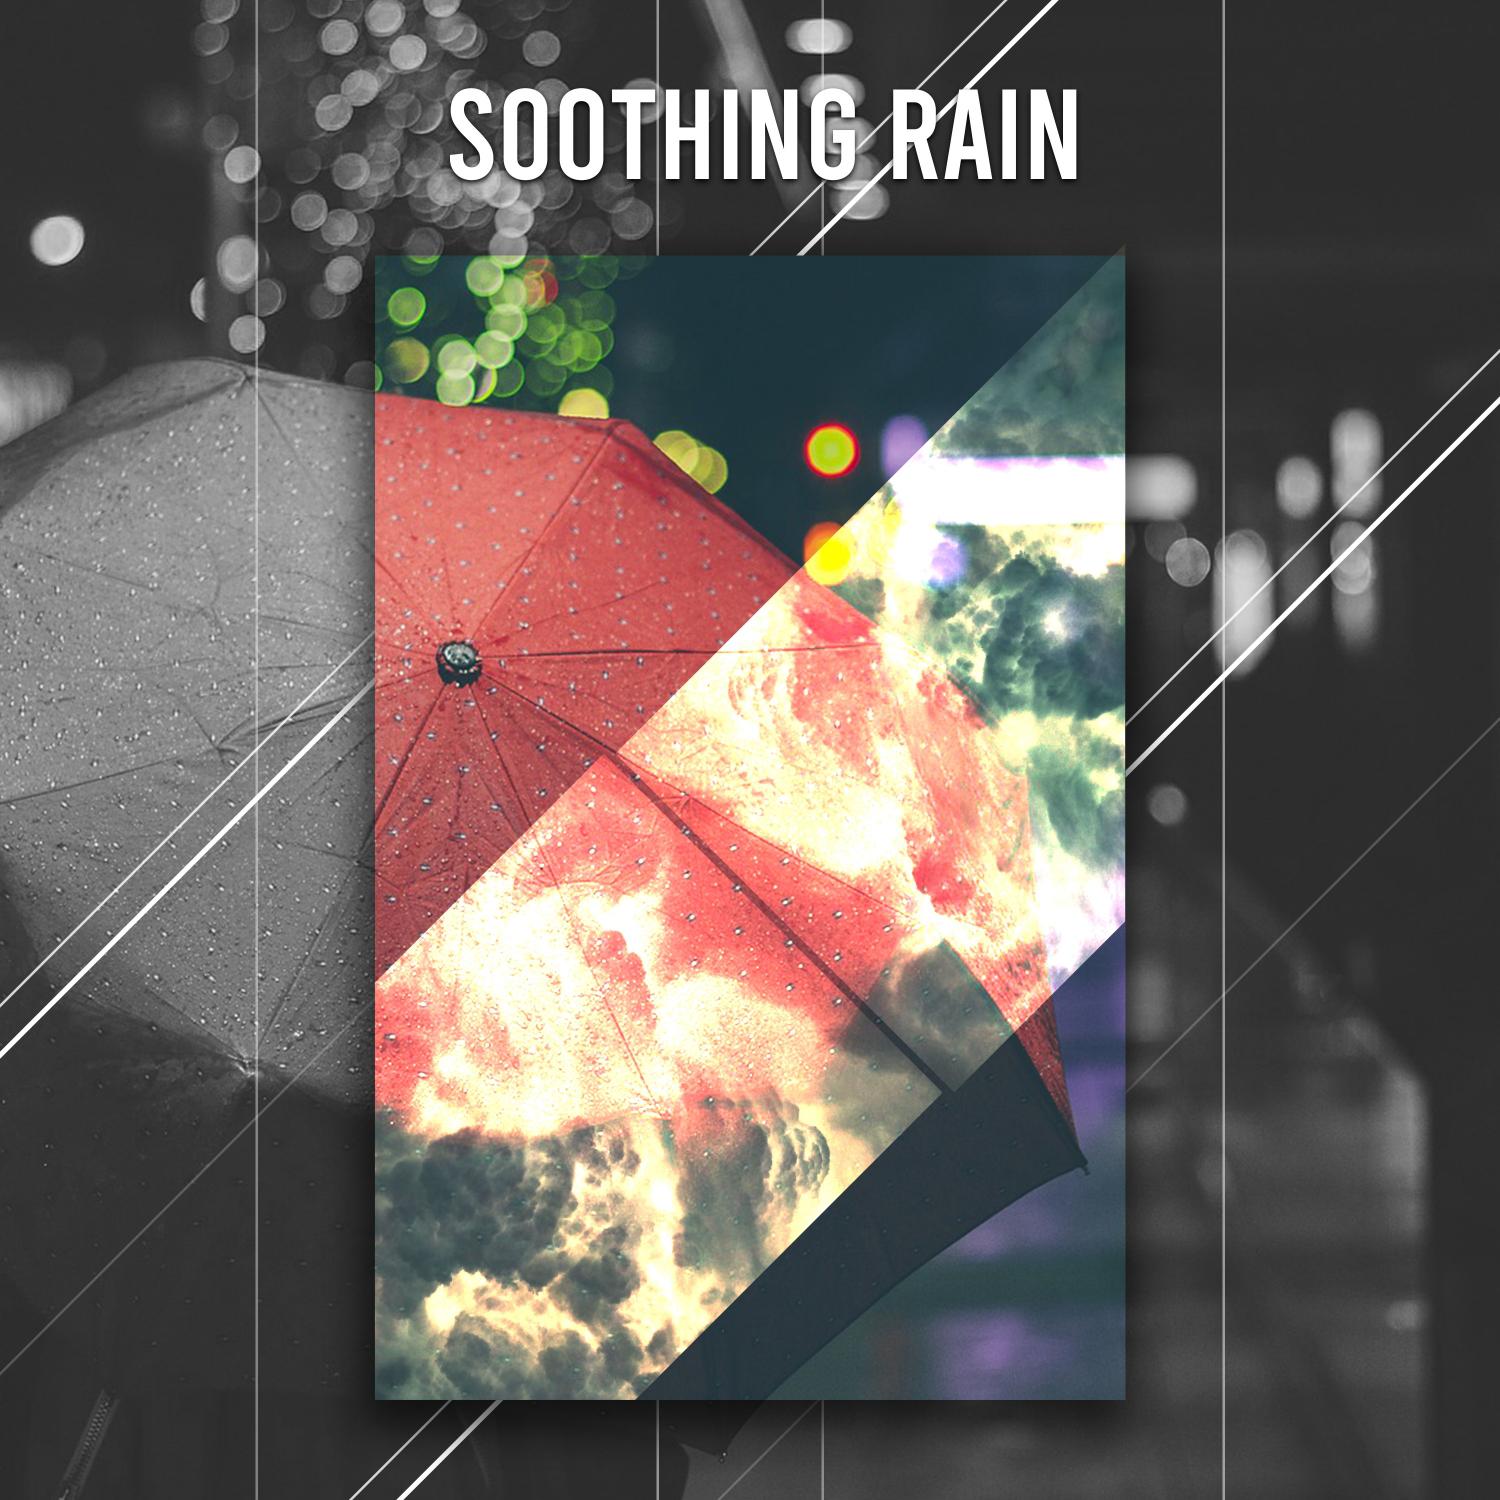 12 Soothing Rain Sounds, Loopable Baby and Toddler Friendly Natural Sleep Aid